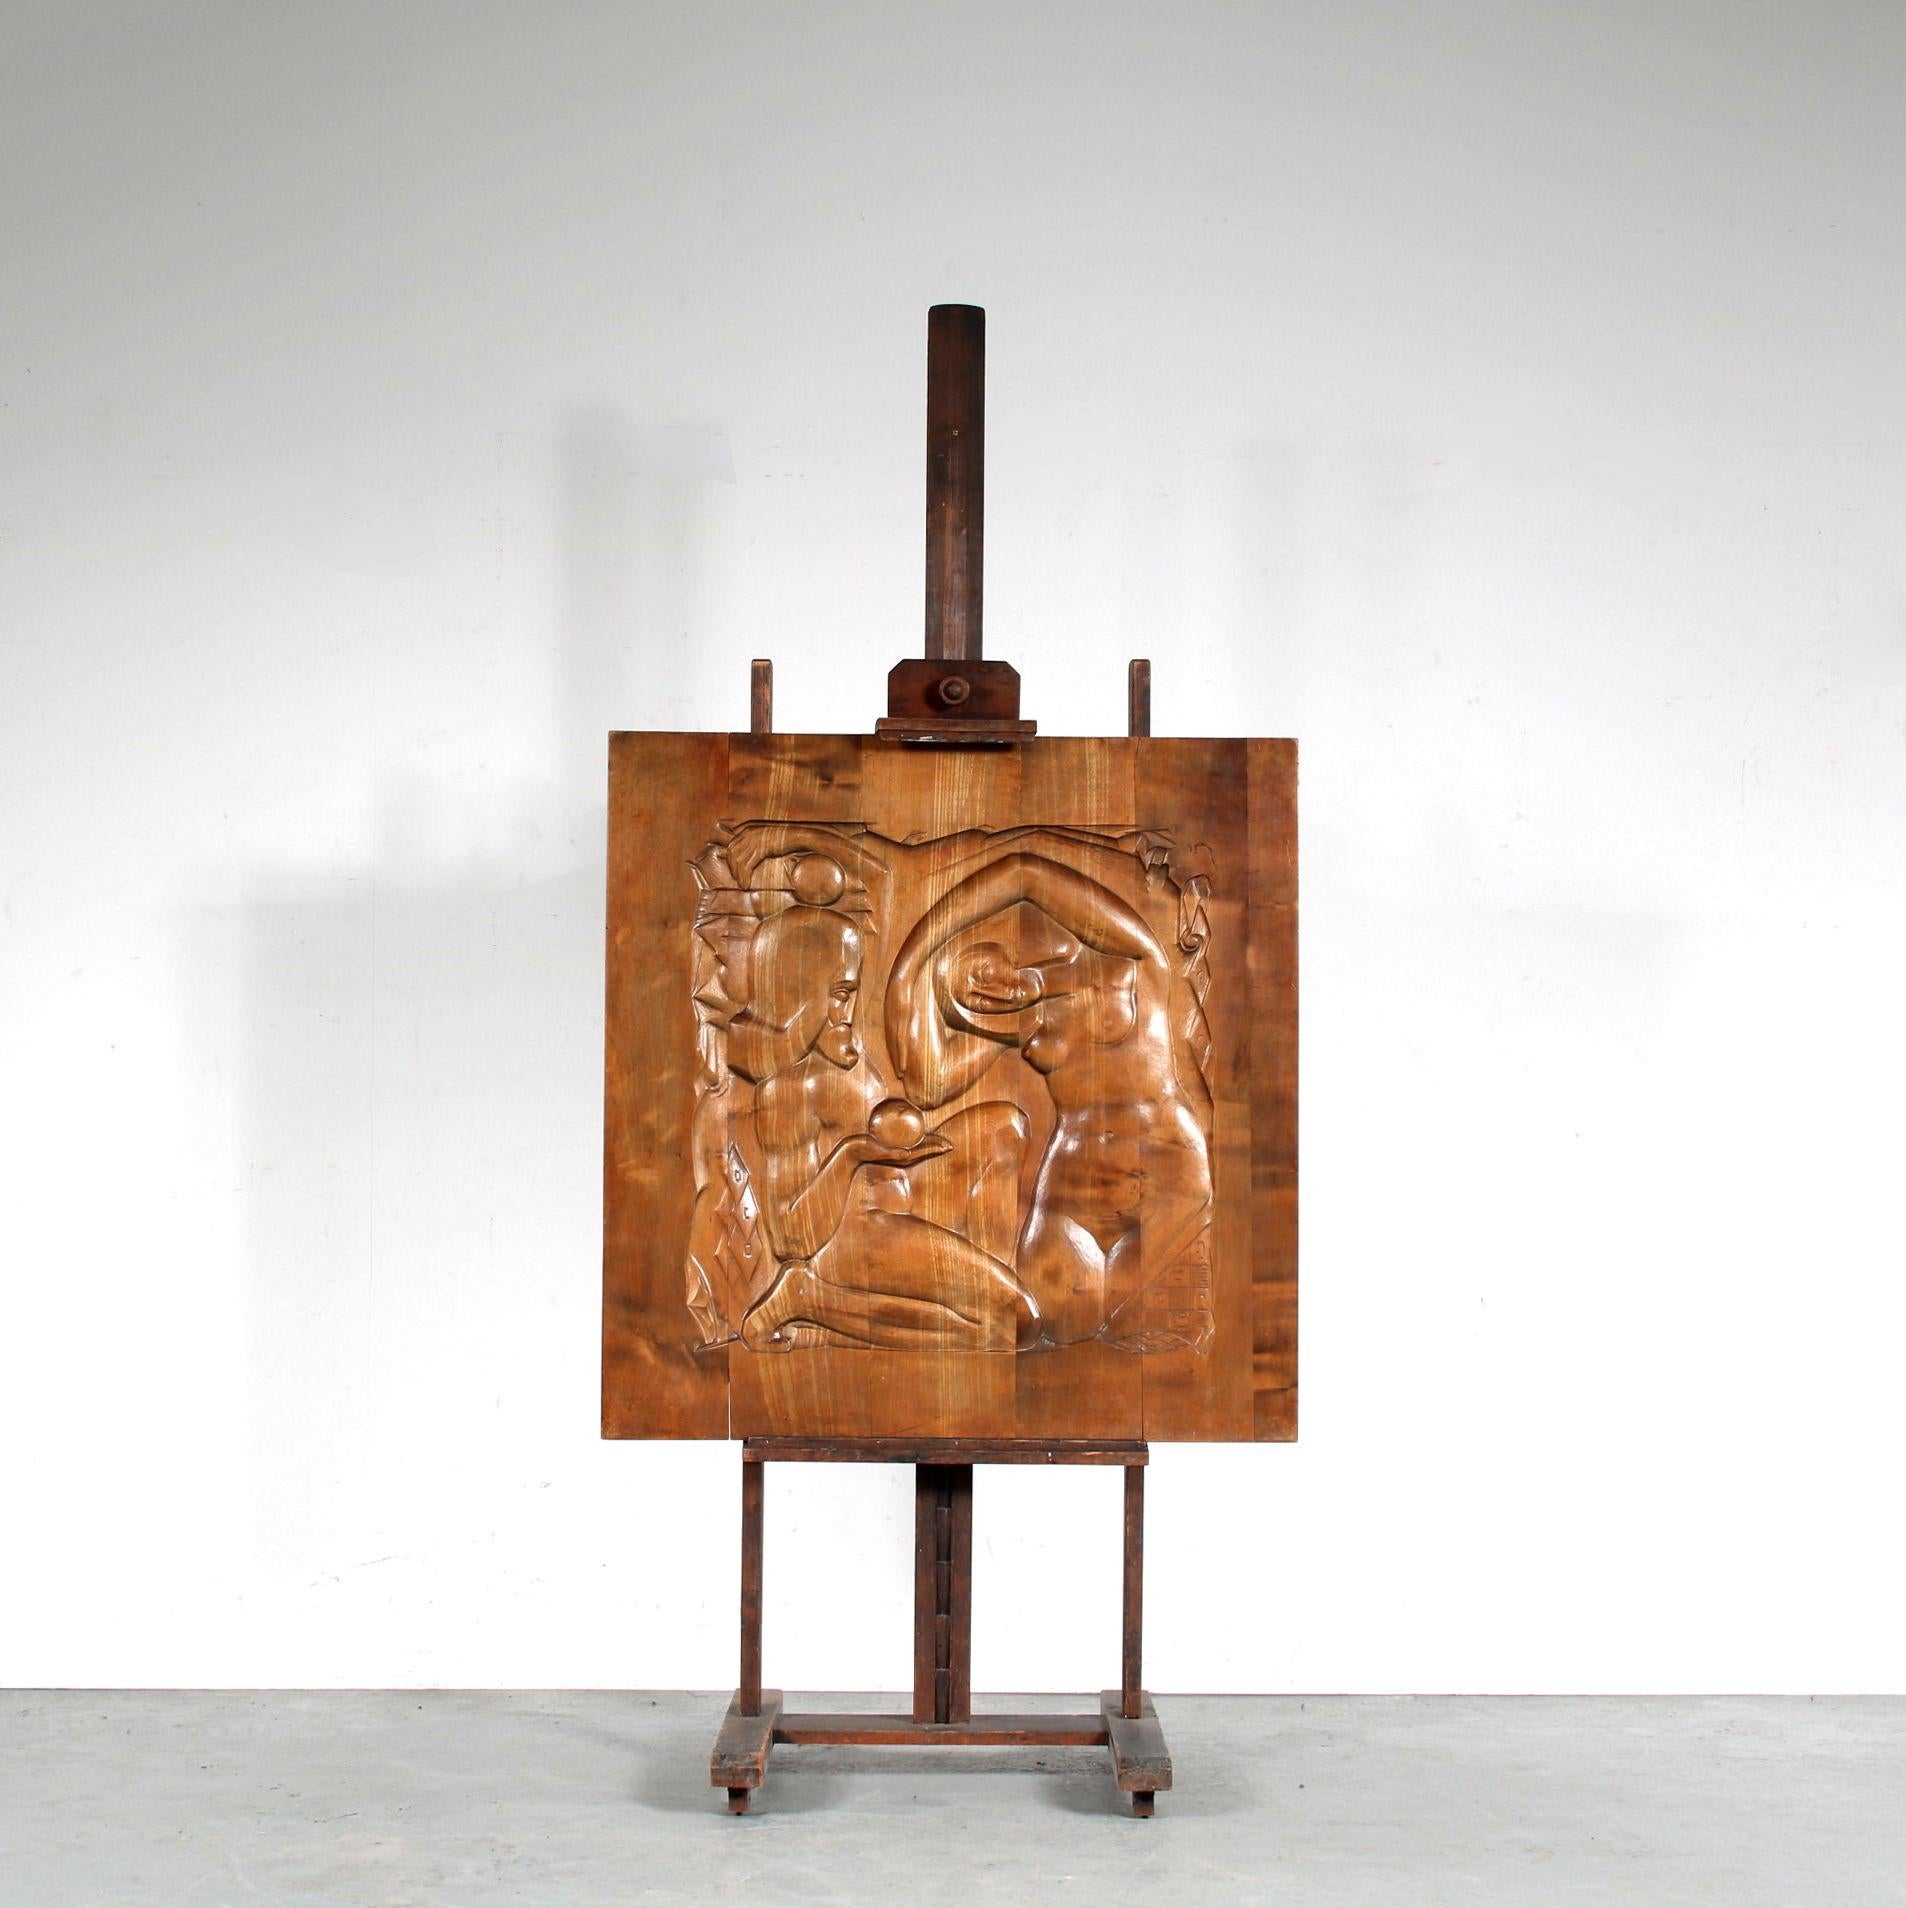 A fantastic wall mounted wooden artwork made by Barend Jordens in the Netherlands around 1920.

The square piece has a beautiful drawing carved into the wood, in the shape of Adam and Eve and the forbidden fruits. The quality, warm brown wood